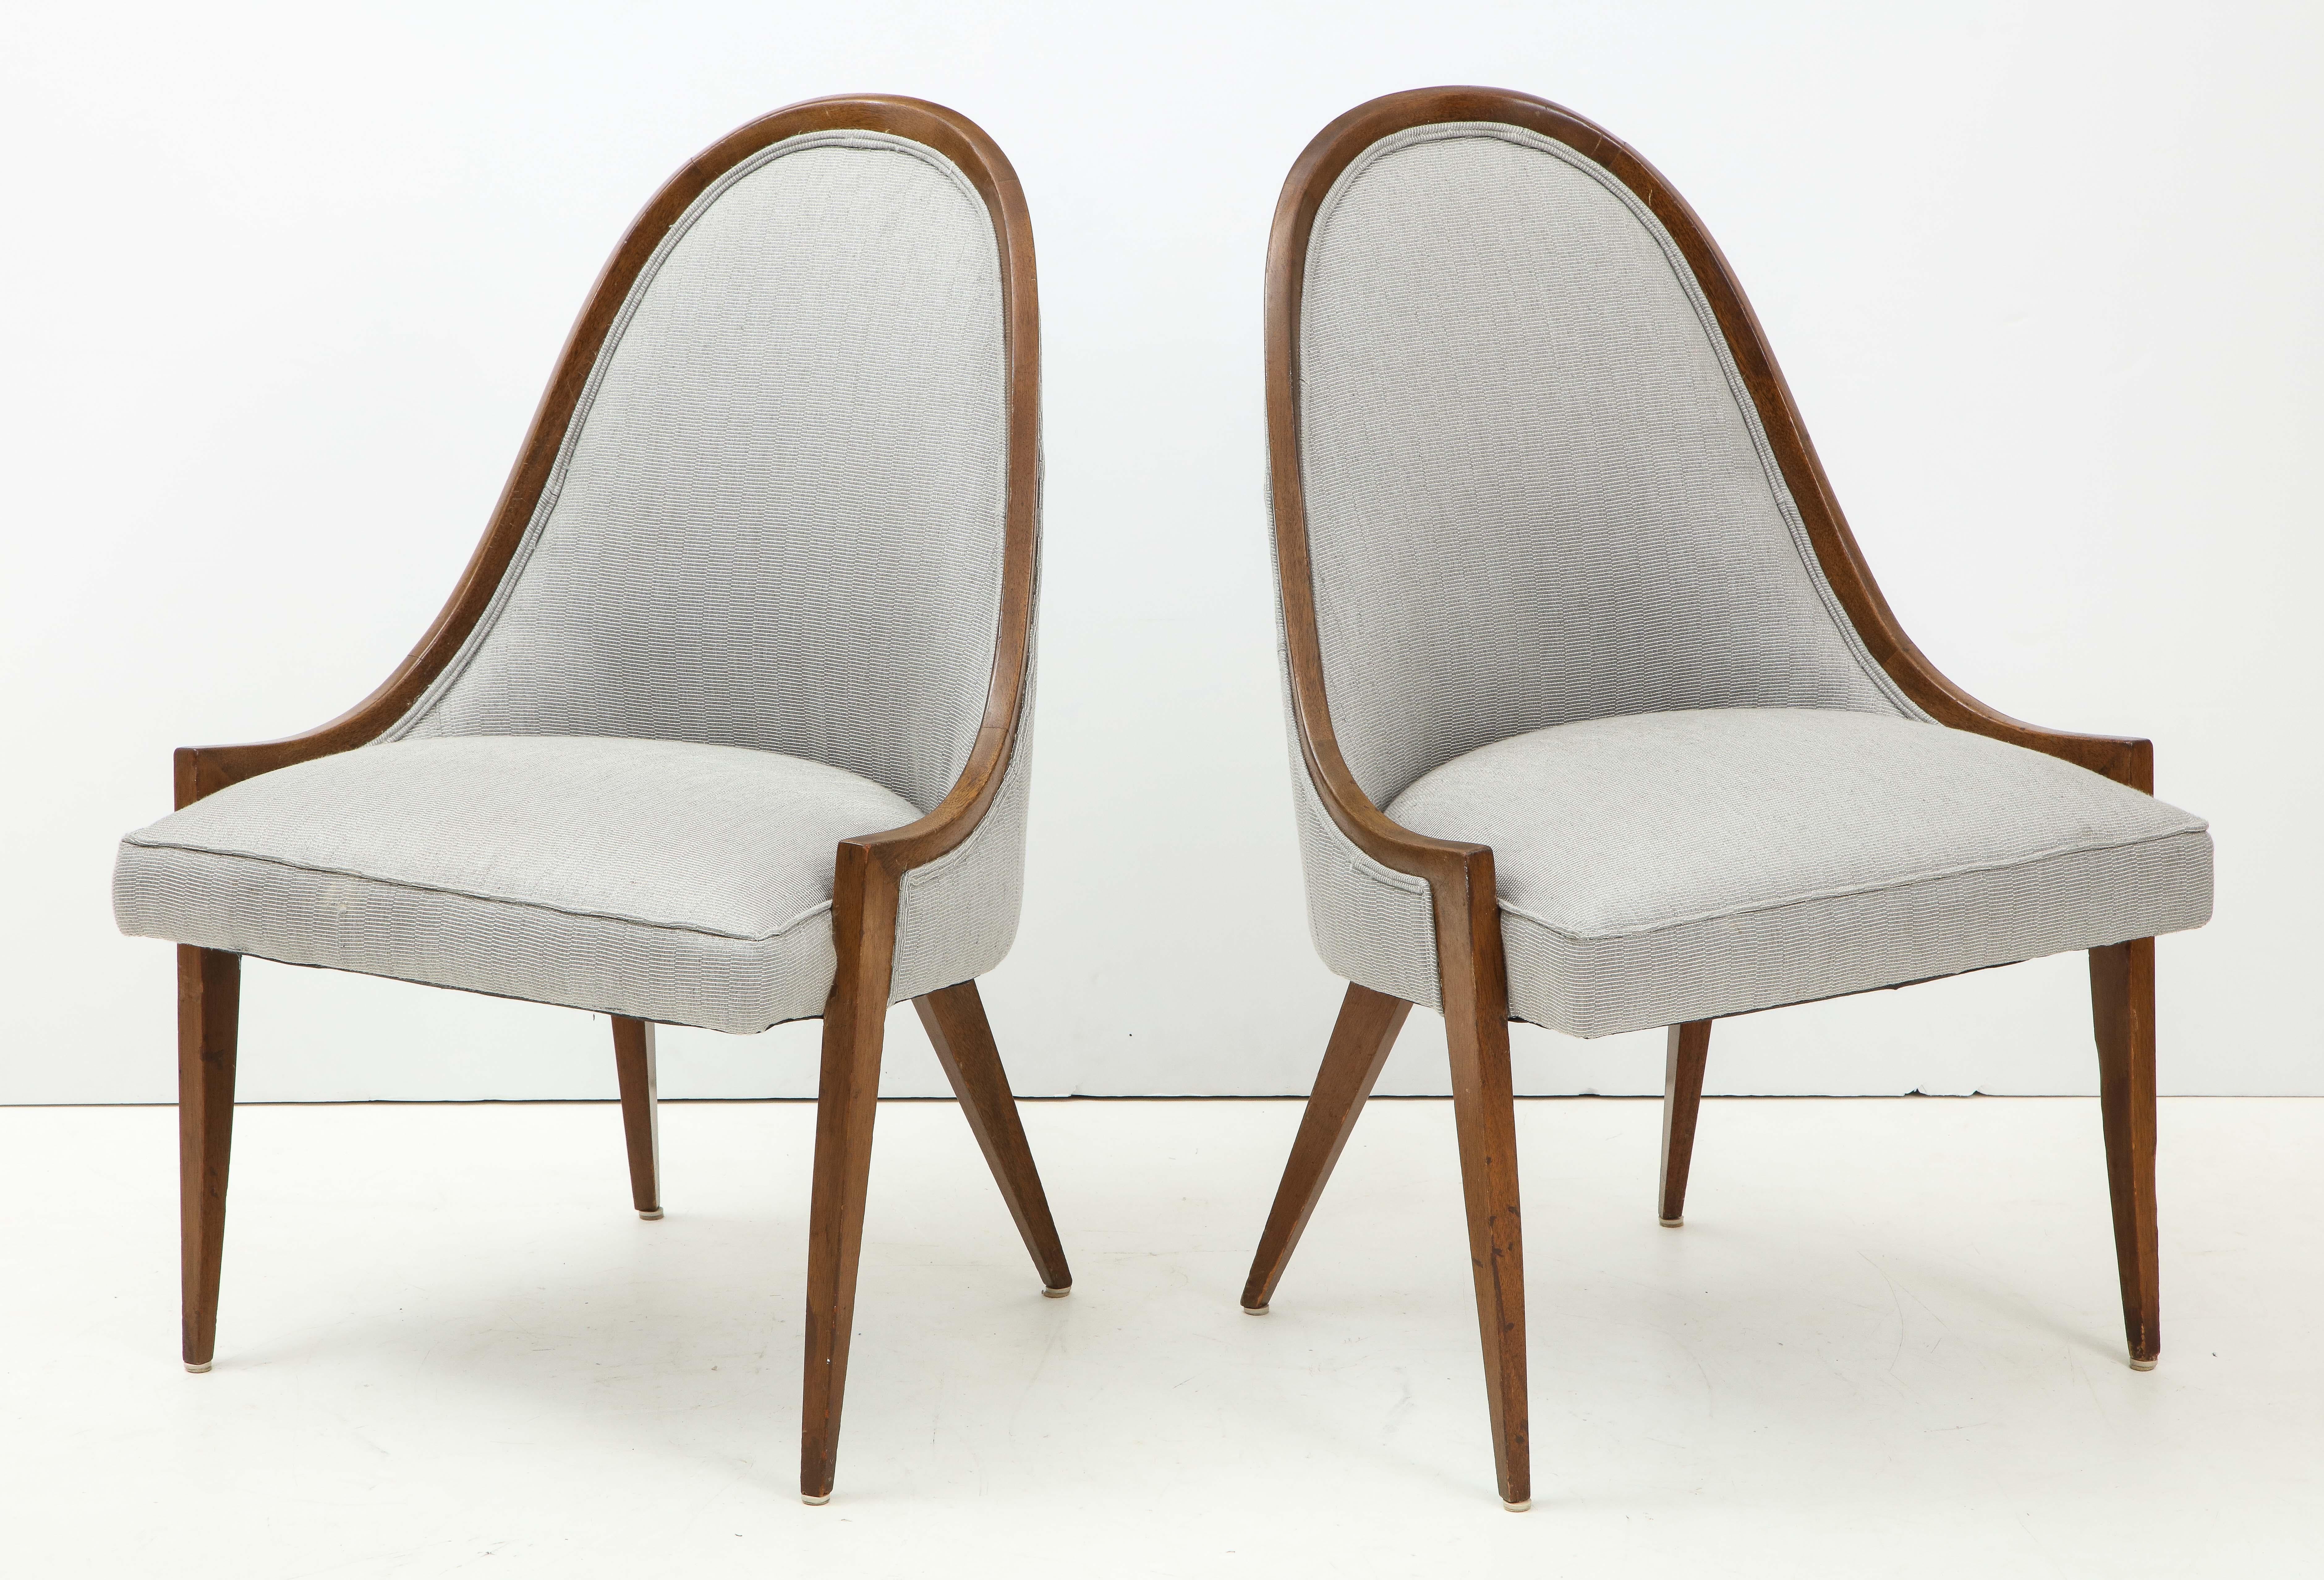 Pair of midcentury Harvey Prober side chairs in an elegant Klismos style, upholstered in grey twill